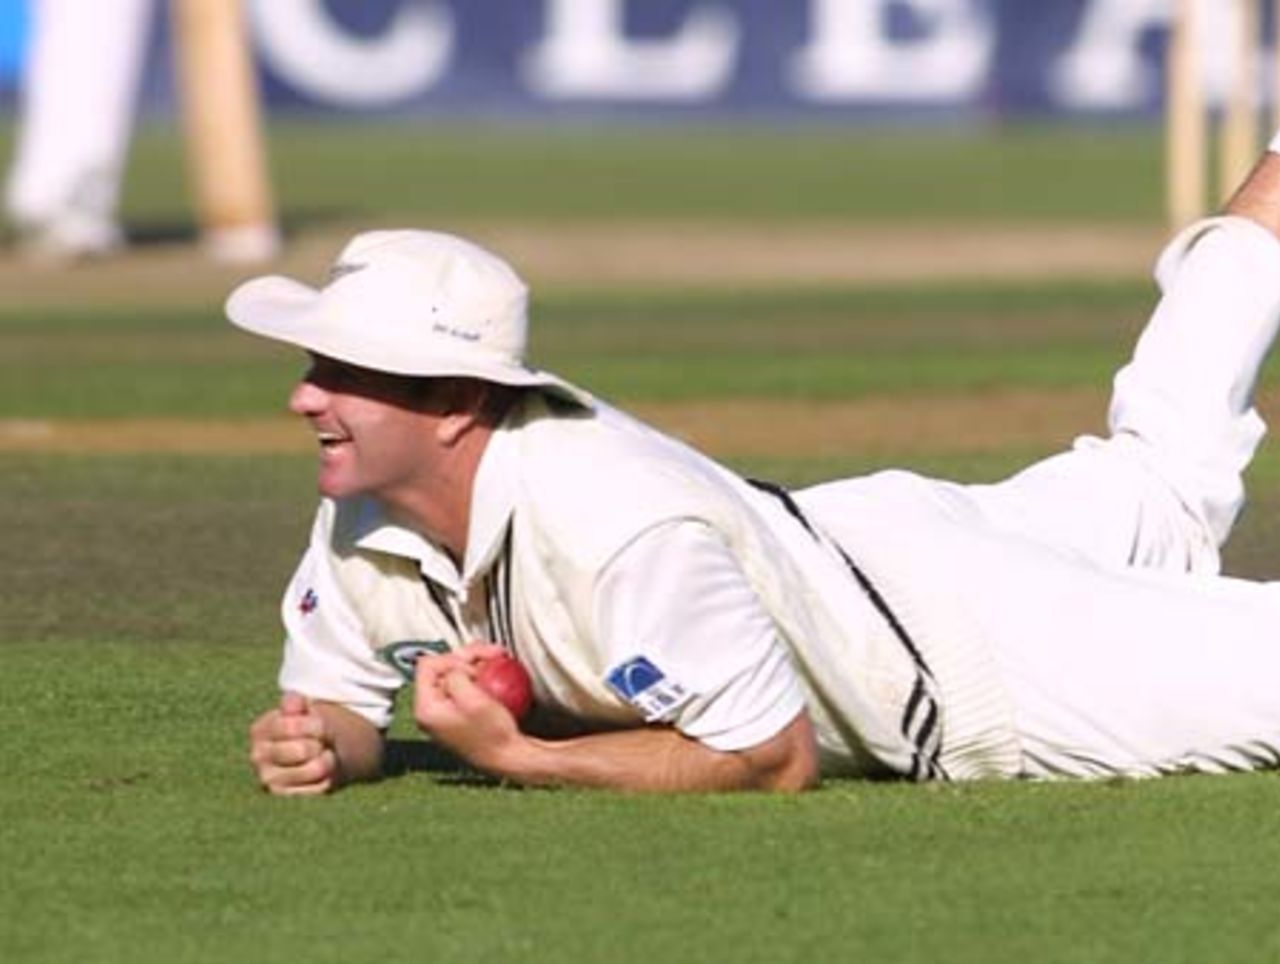 New Zealand fielder Grant Bradburn smiles after completing a diving catch to his left at gully to dismiss Pakistan batsman Humayun Farhat in his second innings, caught off the bowling of fast medium bowler Chris Martin for 26. 3rd Test: New Zealand v Pakistan at WestpacTrust Park, Hamilton, 27-31 March 2001 (Day 4).